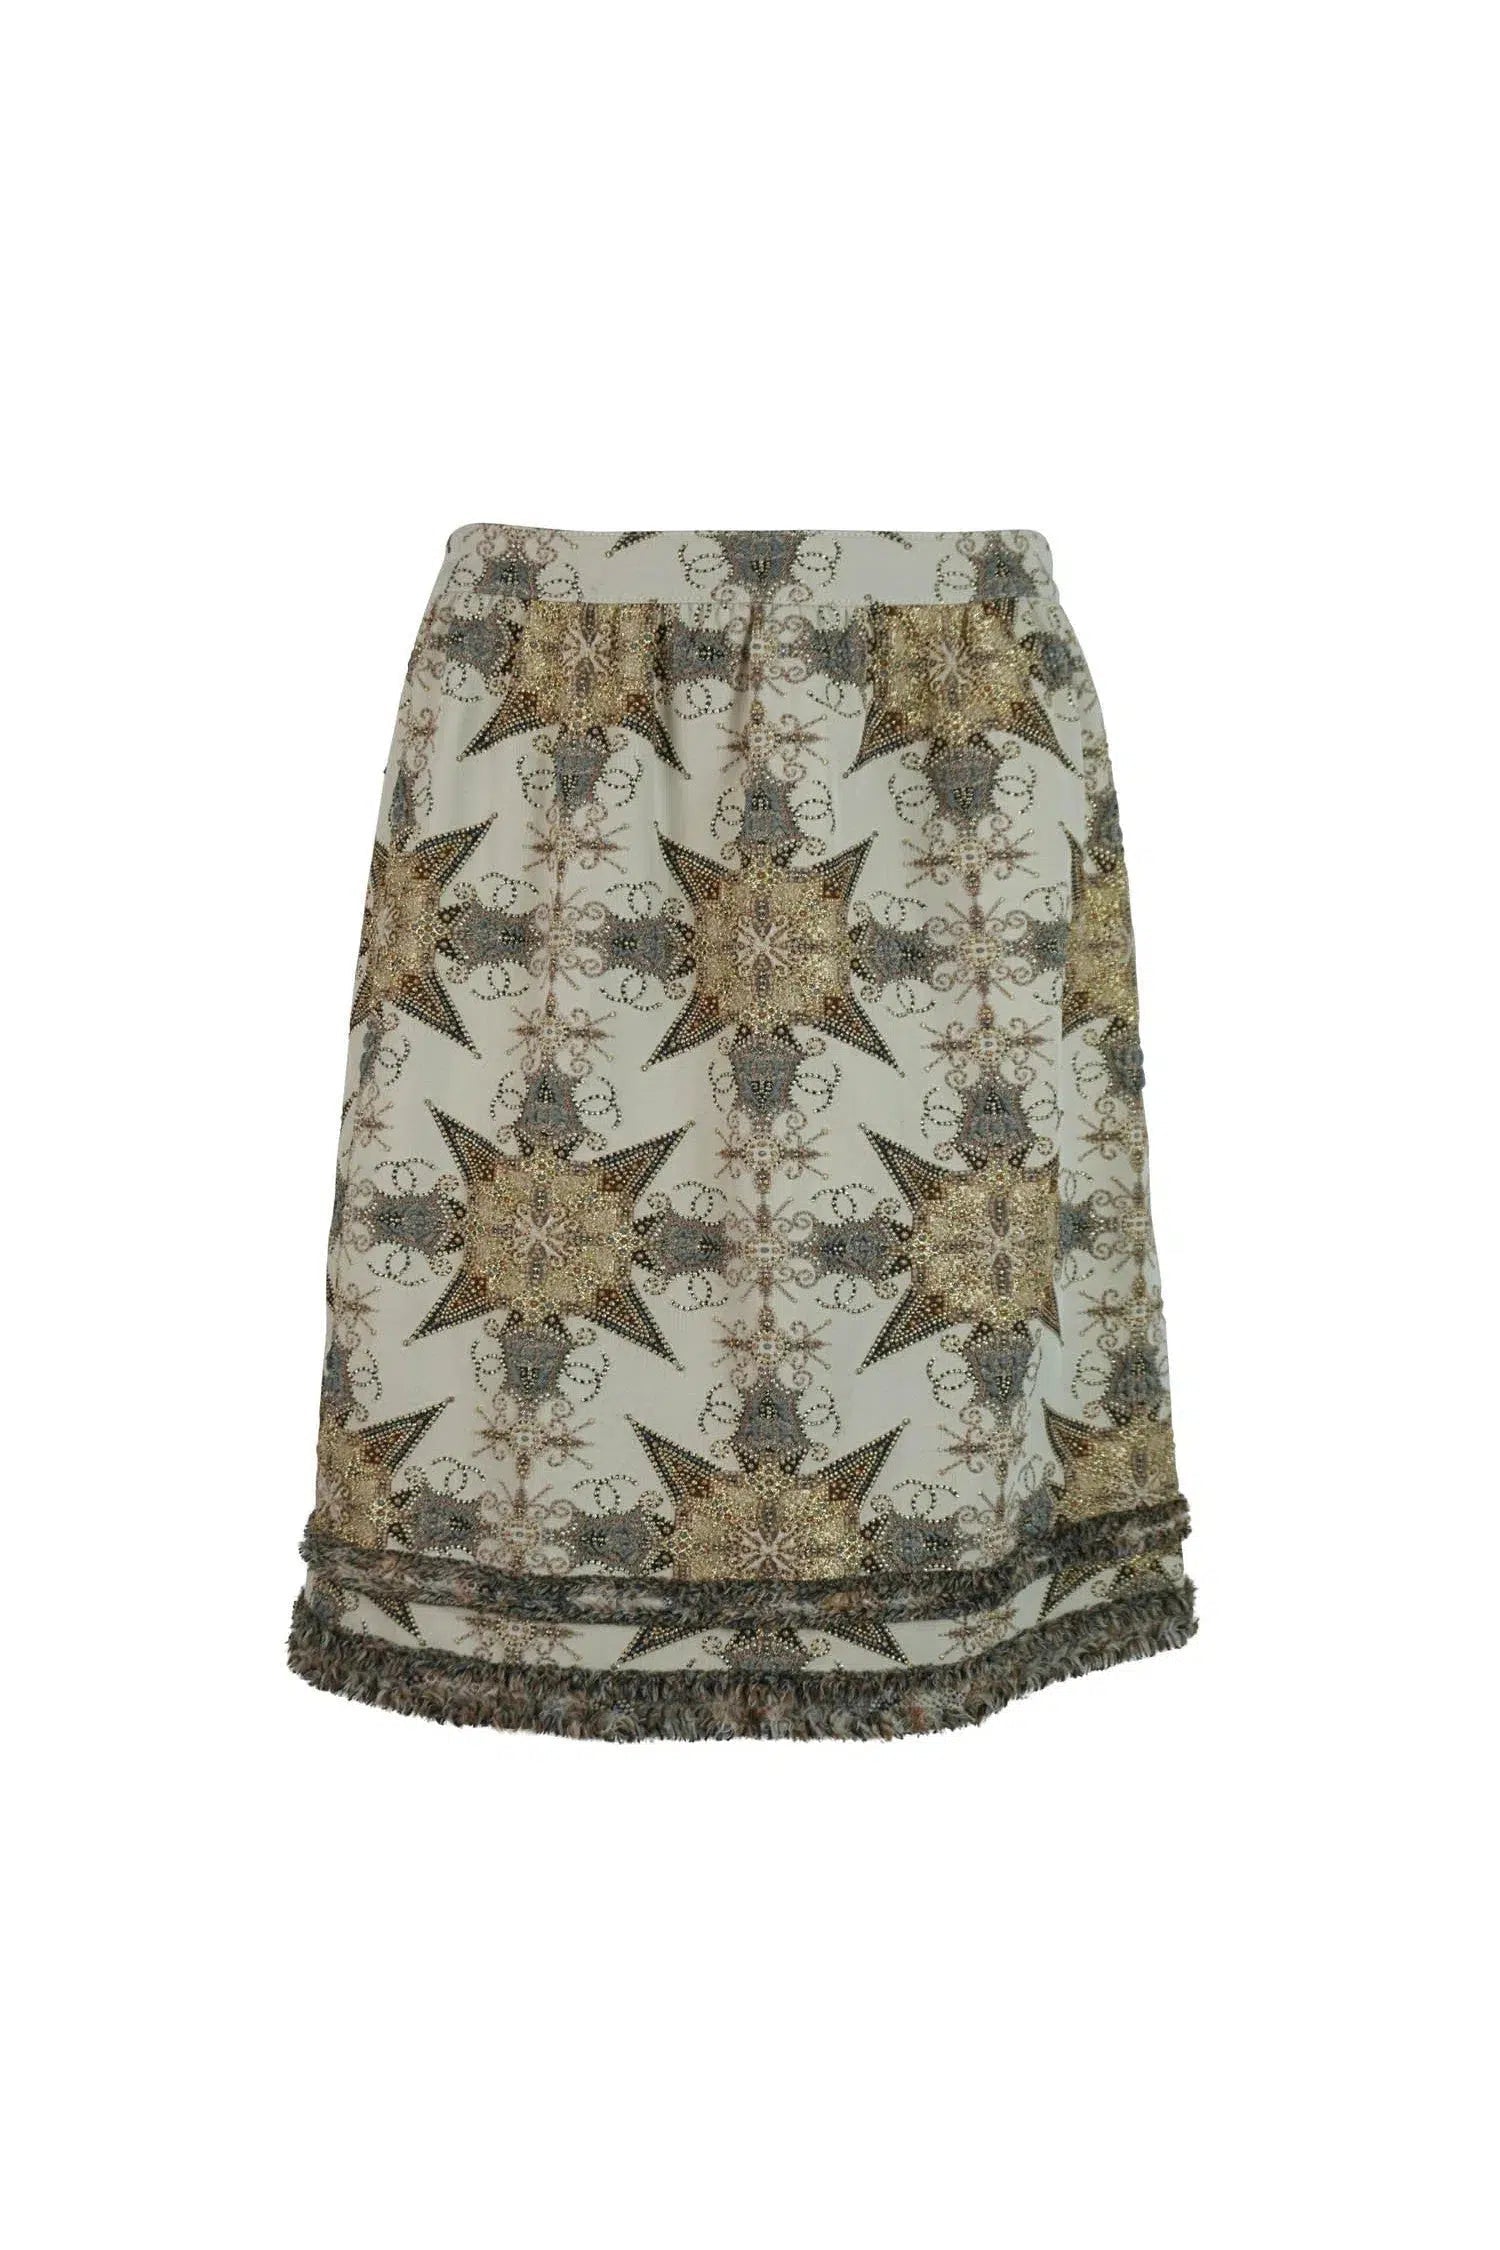 Chanel Embellished Skirt 40/8 - Foxy Couture Carmel